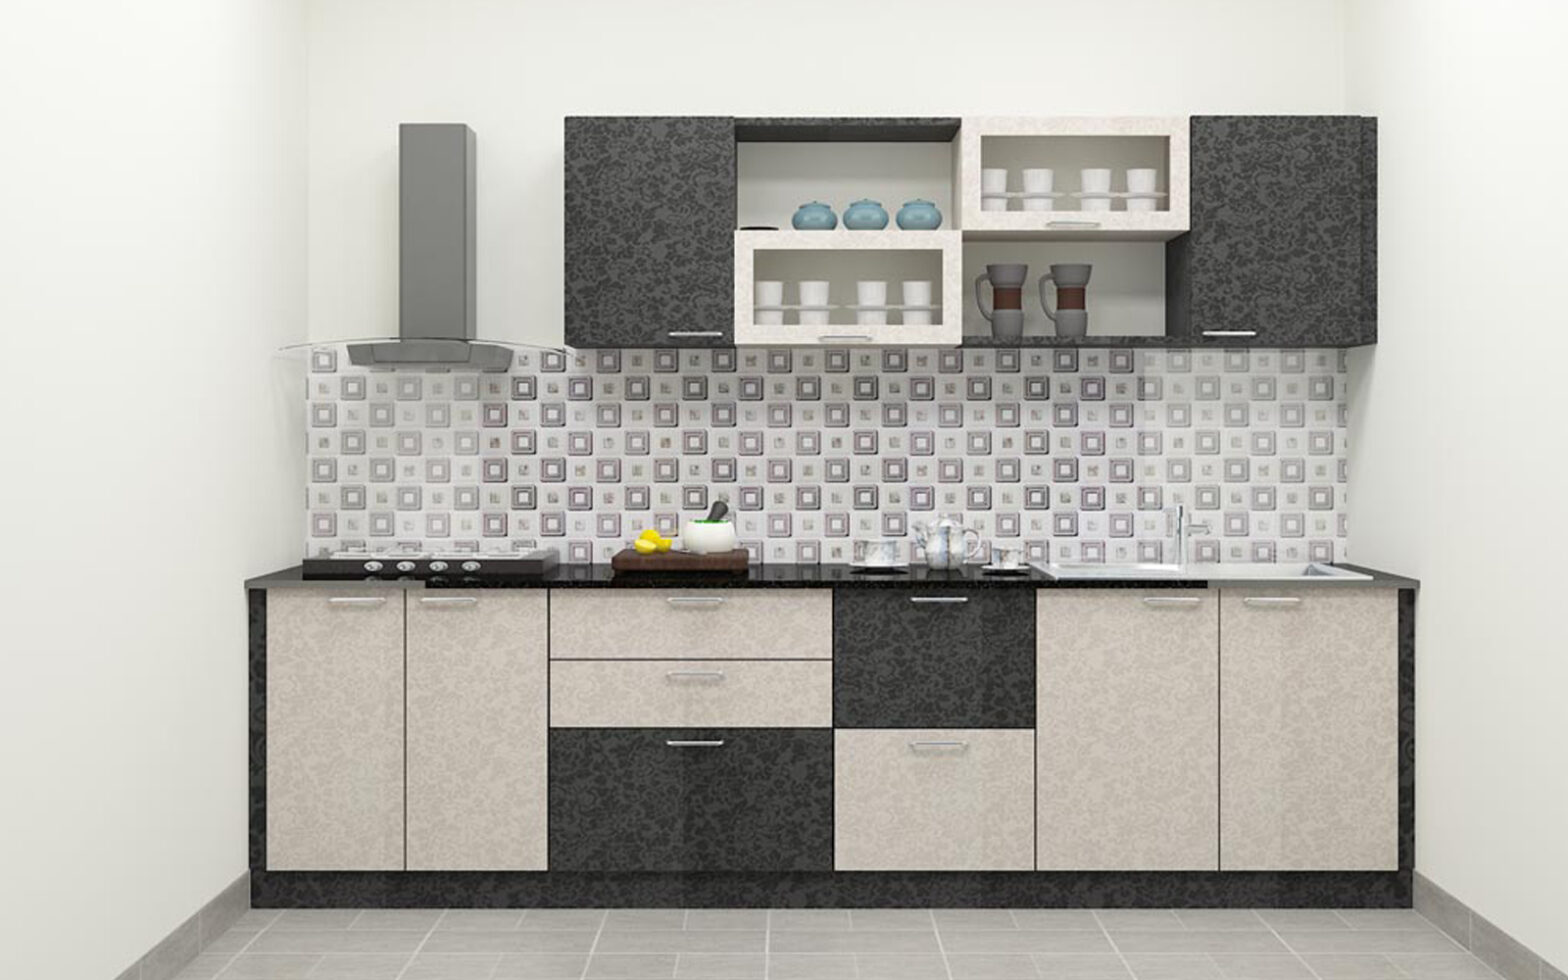 Godrej Modular Kitchen, a long-lasting solution for your Modular Kitchen quest